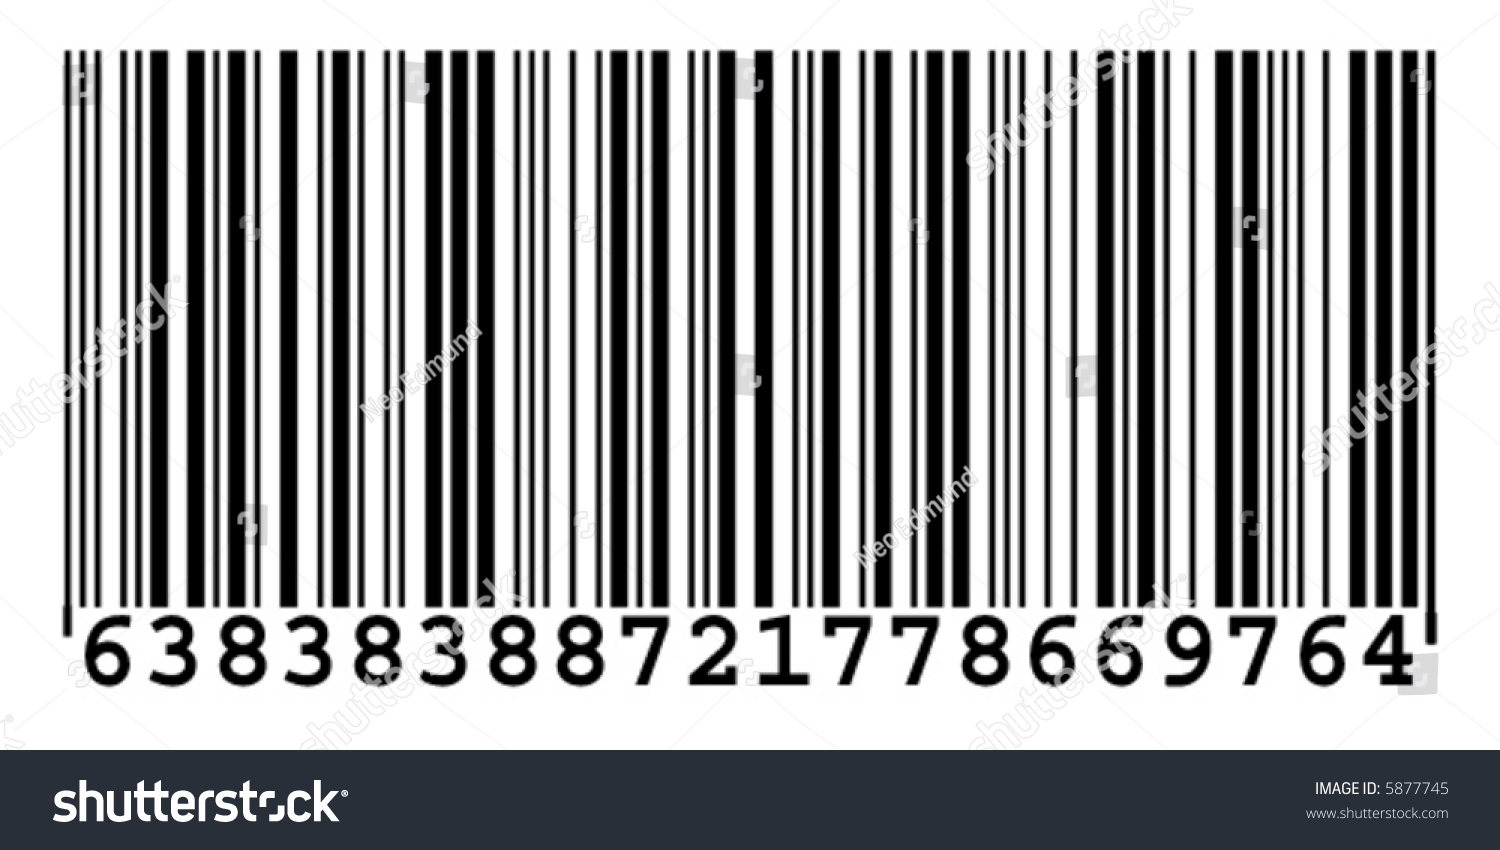 barcode image clipart - photo #38